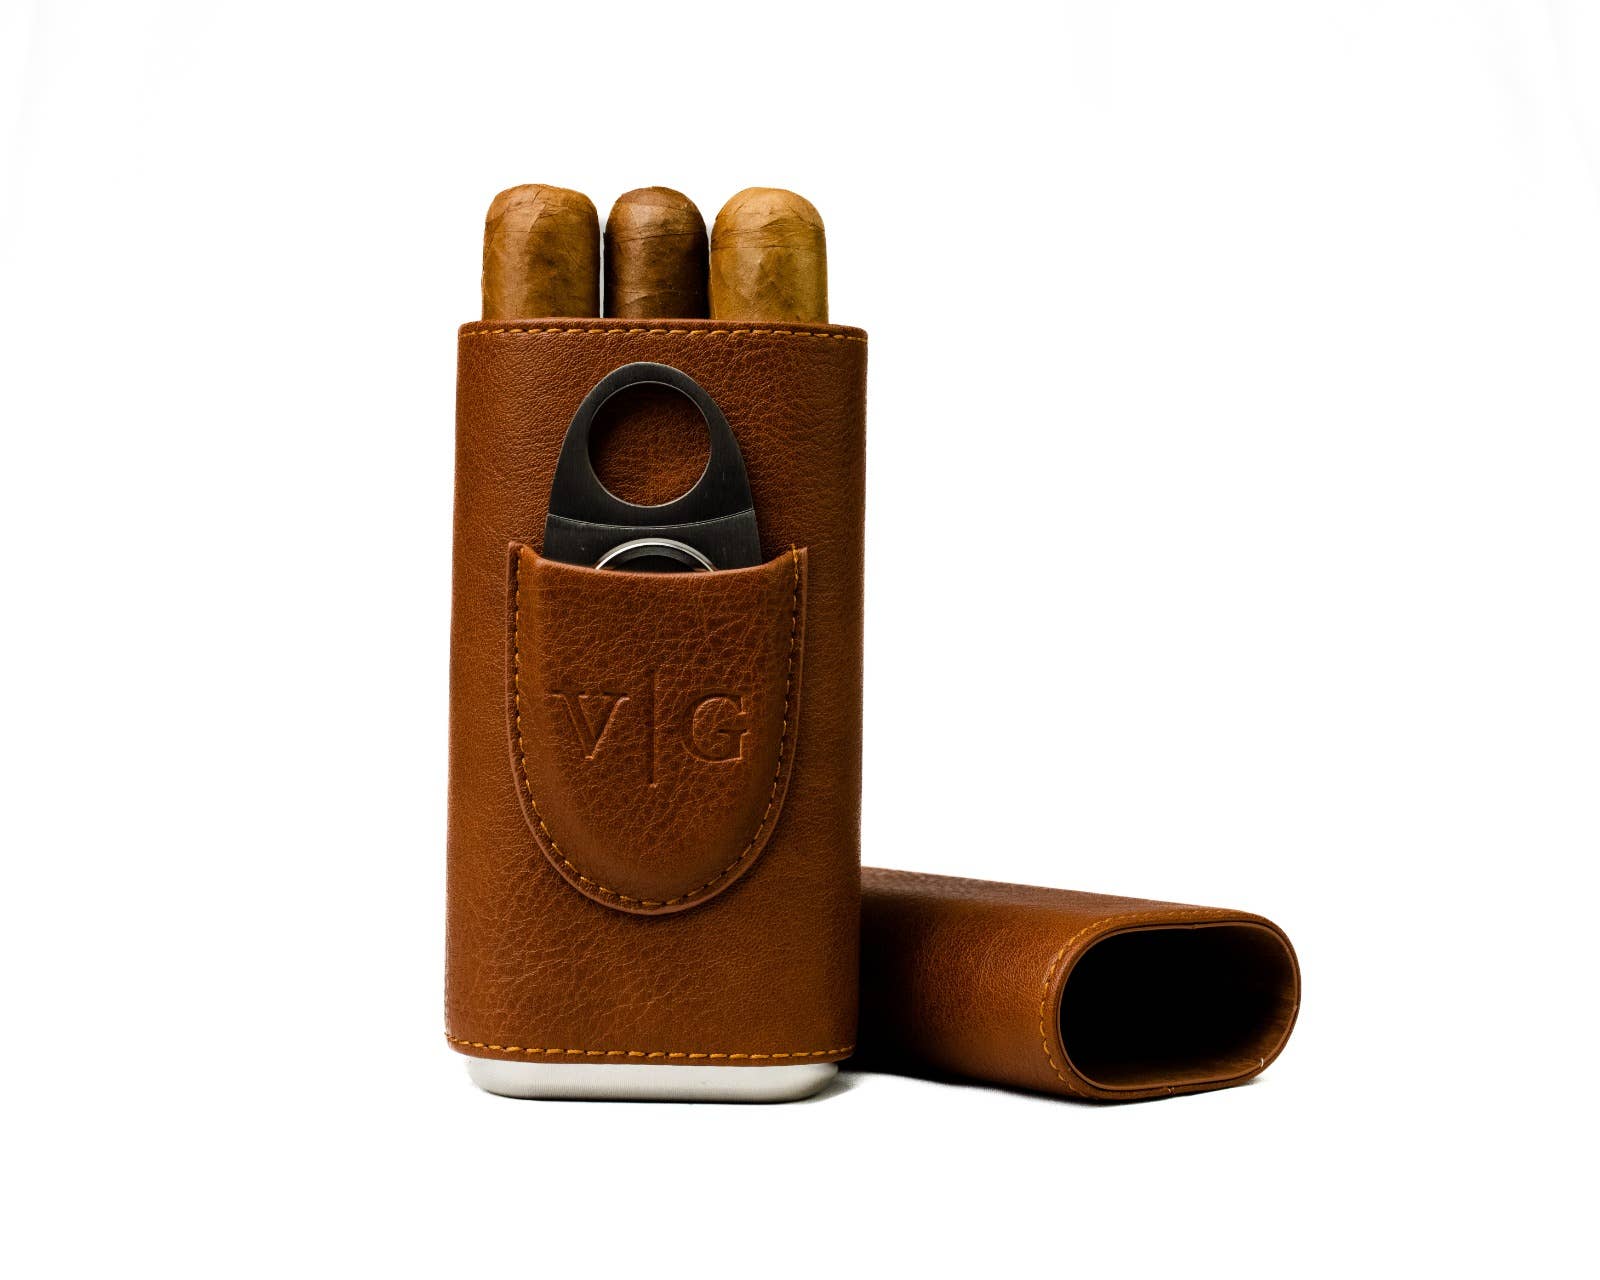 personalized cigars case, Genuine leather cigars pouch